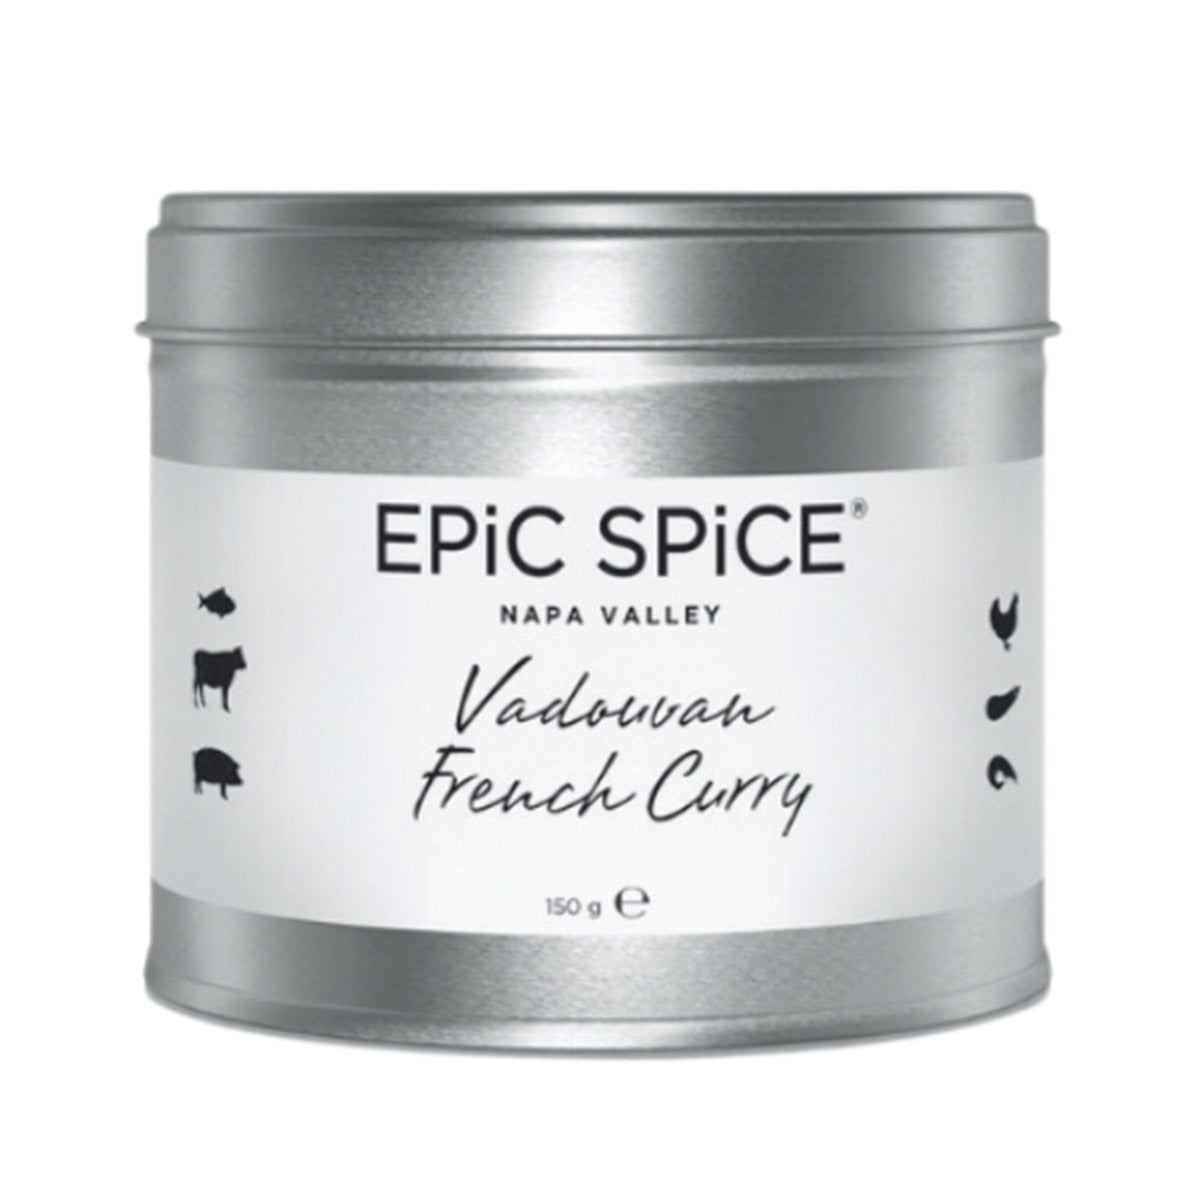 Vadouvan French Curry by Epic Spice, 5.3 oz (150 g)